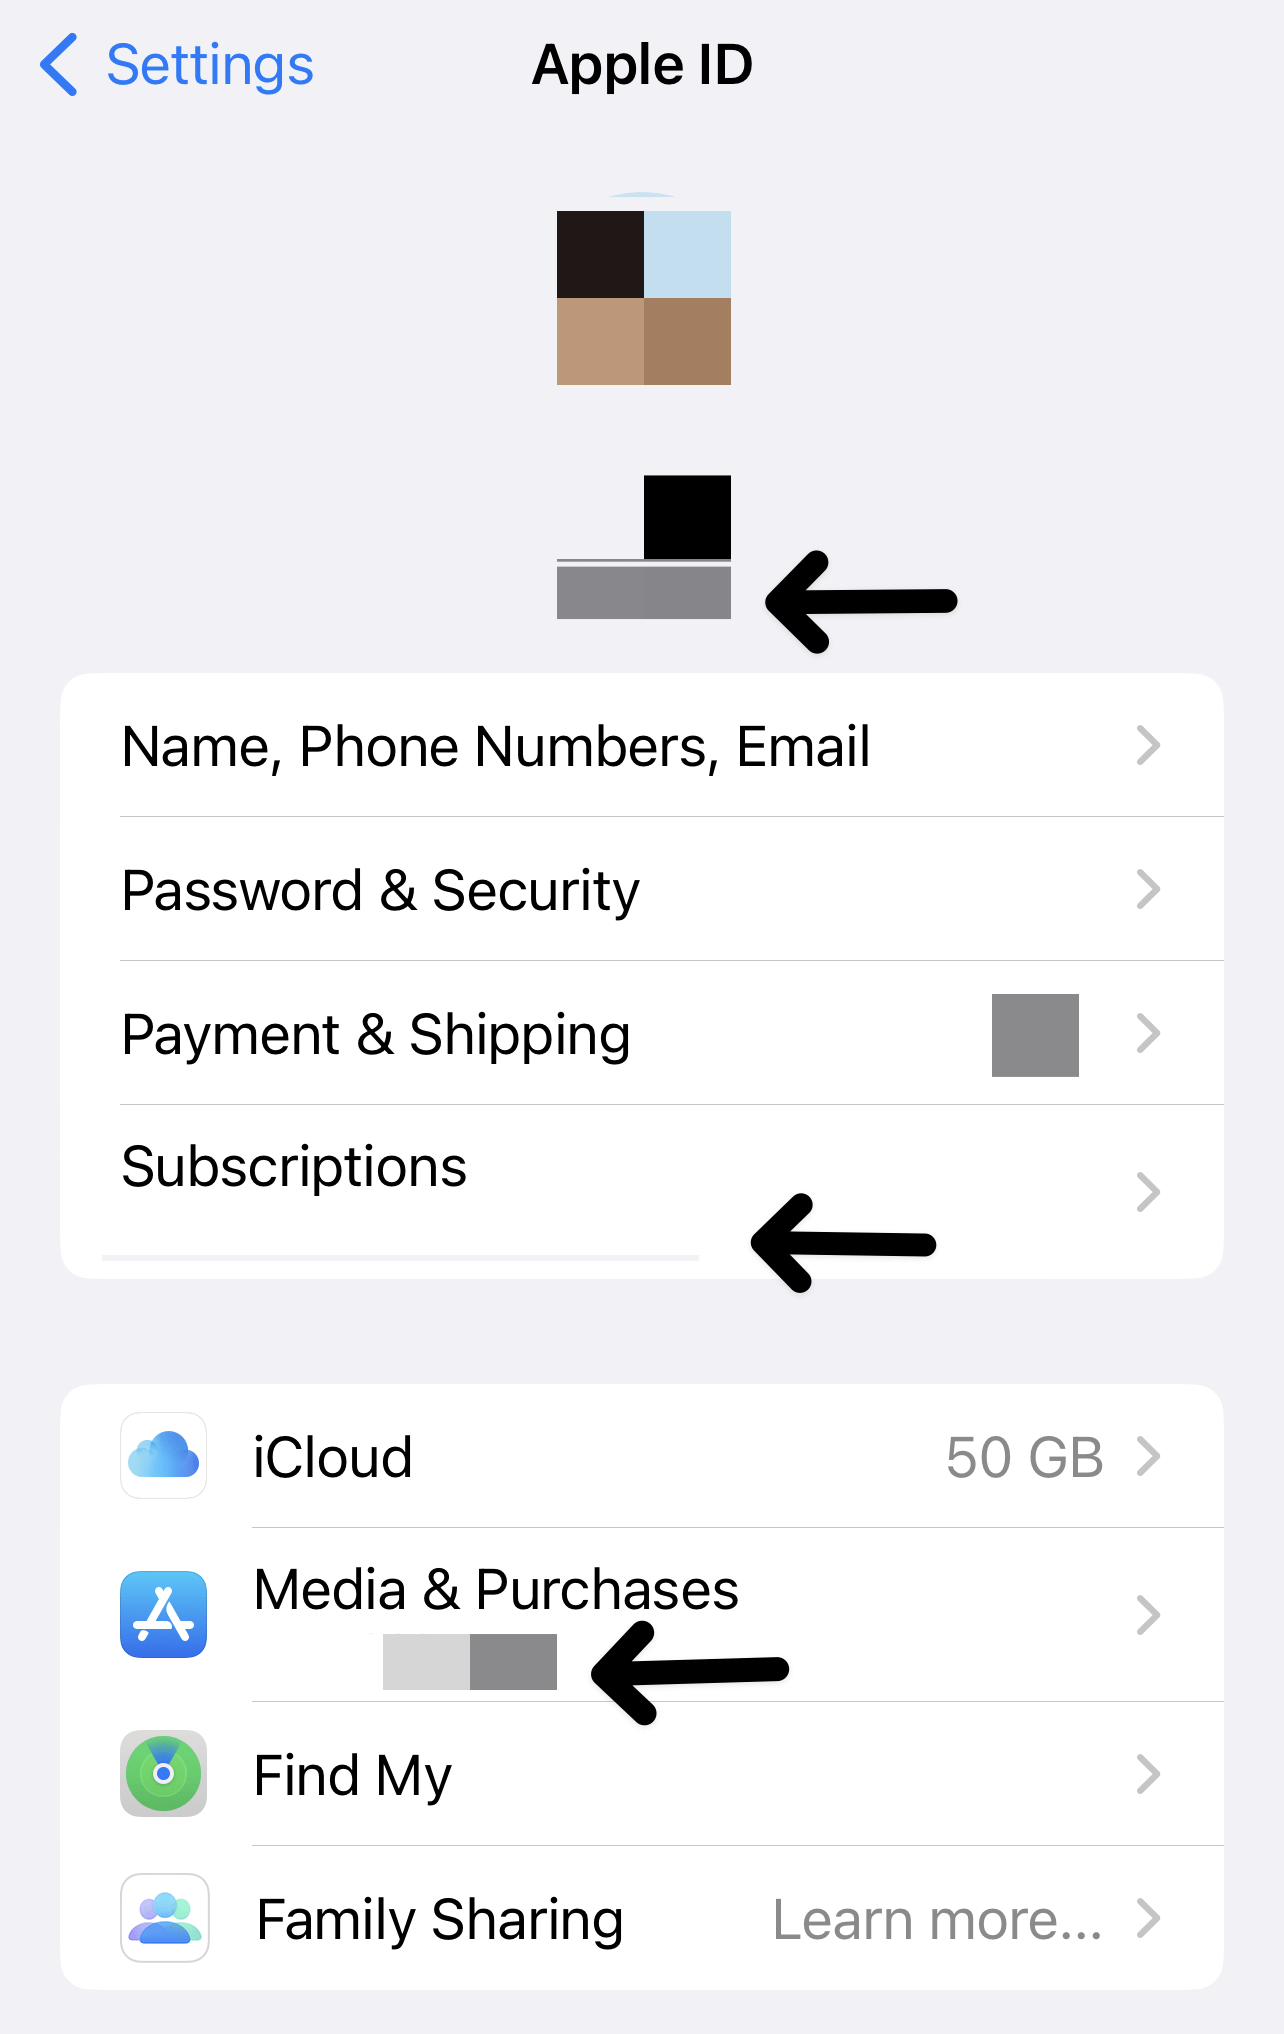 Using the same apple id on the app store to fix Apple App Store “Payment Not Completed” or “Your Purchase Could Not Be Completed” errors on iPhone, macOS, or iPad